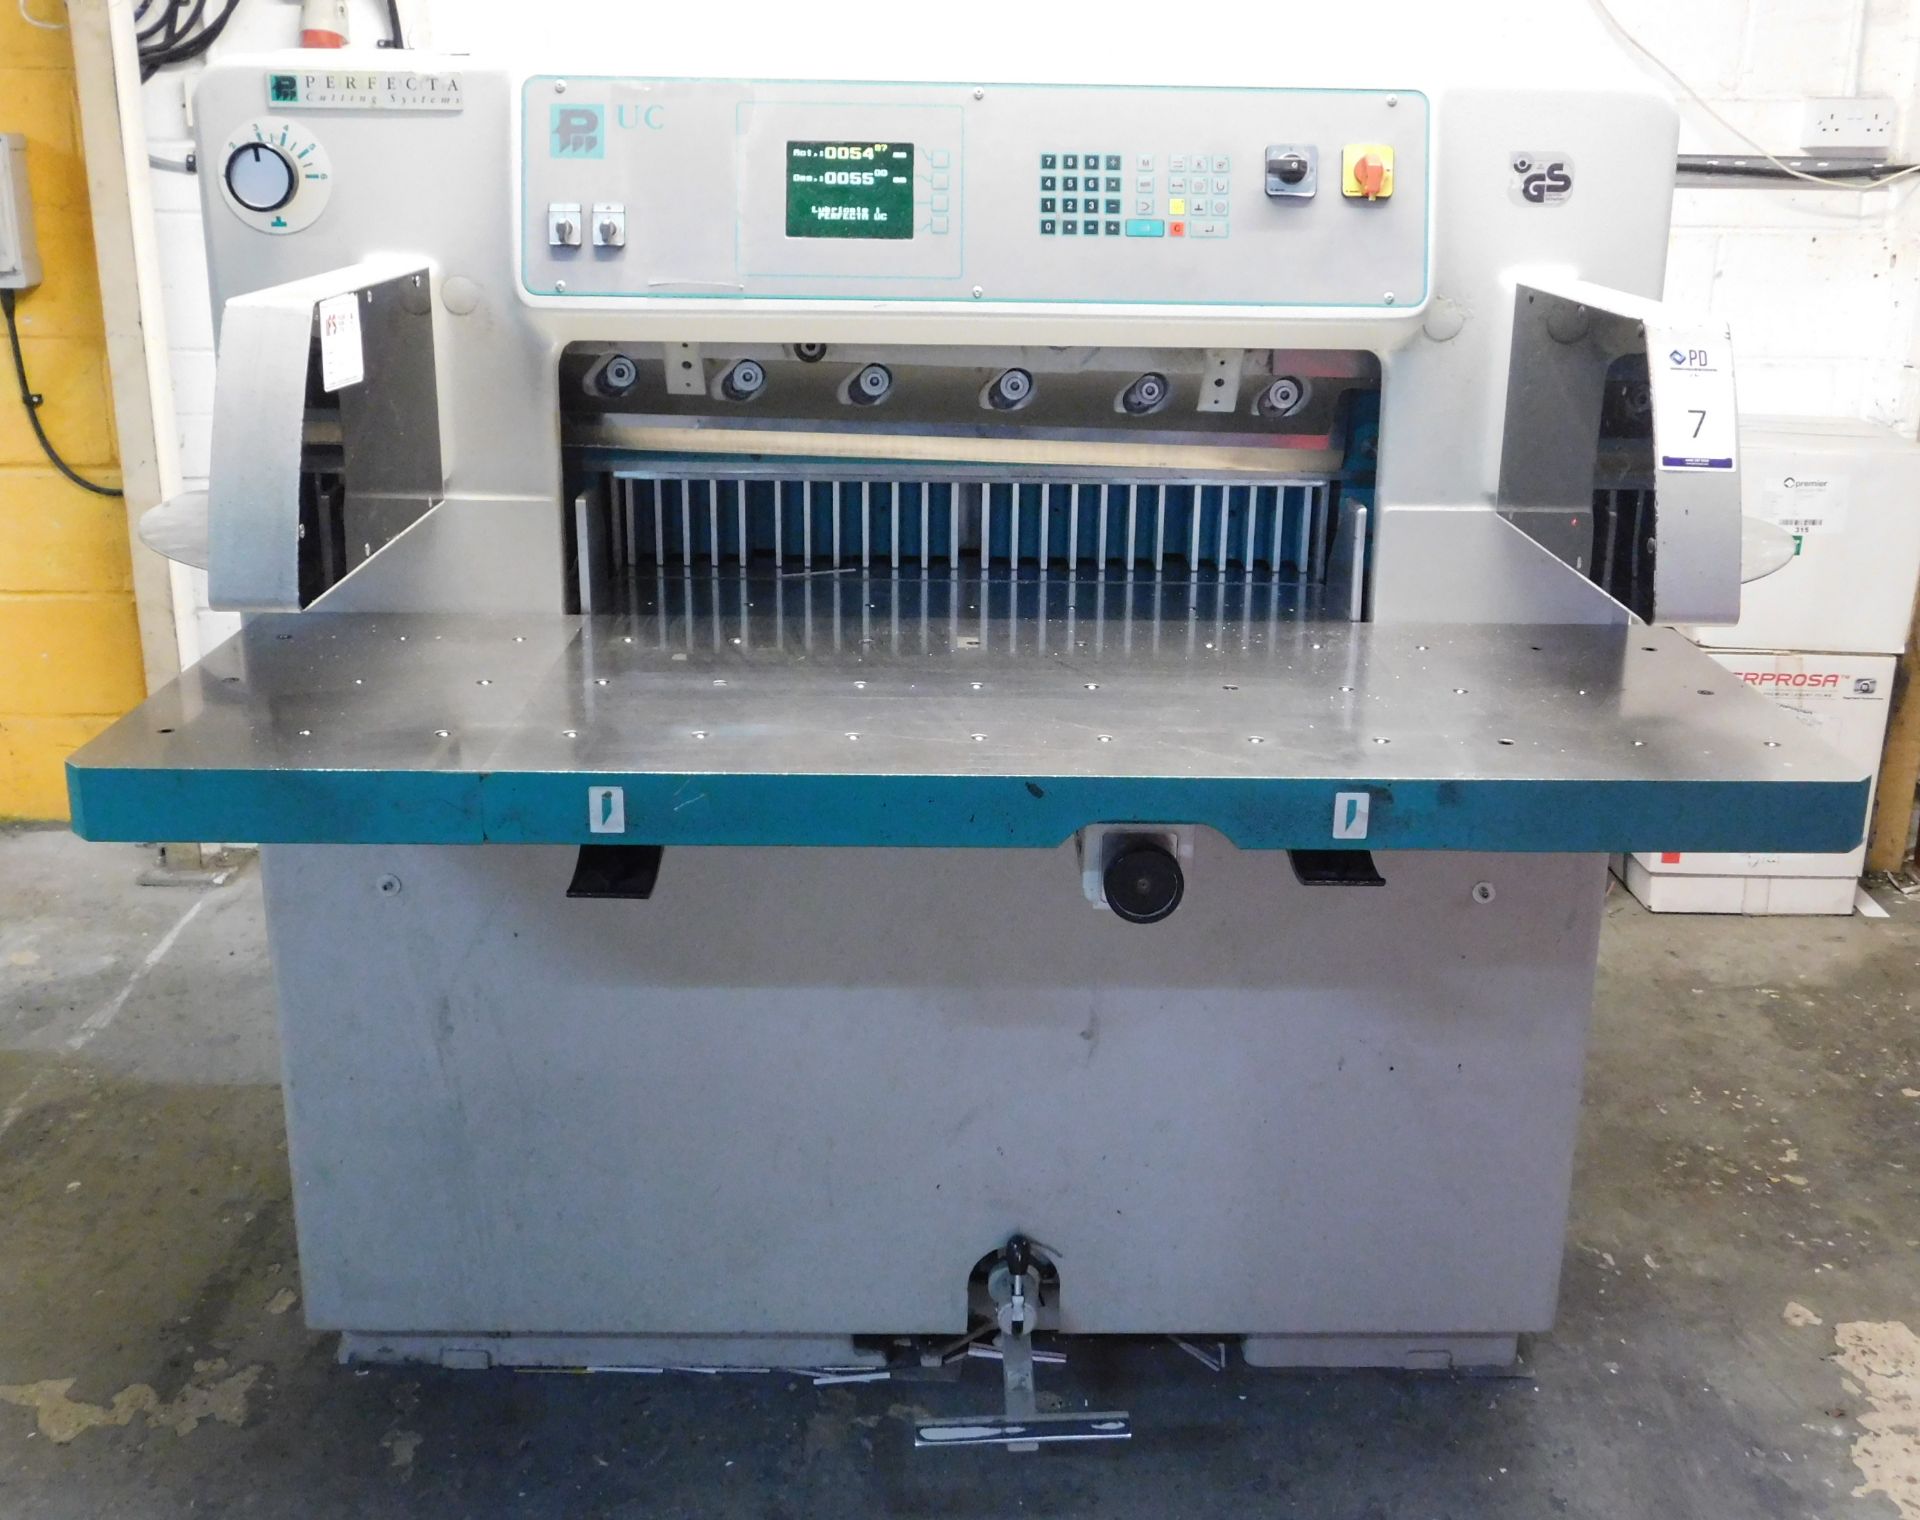 Perfecta Type 76 UCV Guillotine, Serial Number 74023 (Location: Tonbridge, Kent. Please Refer to